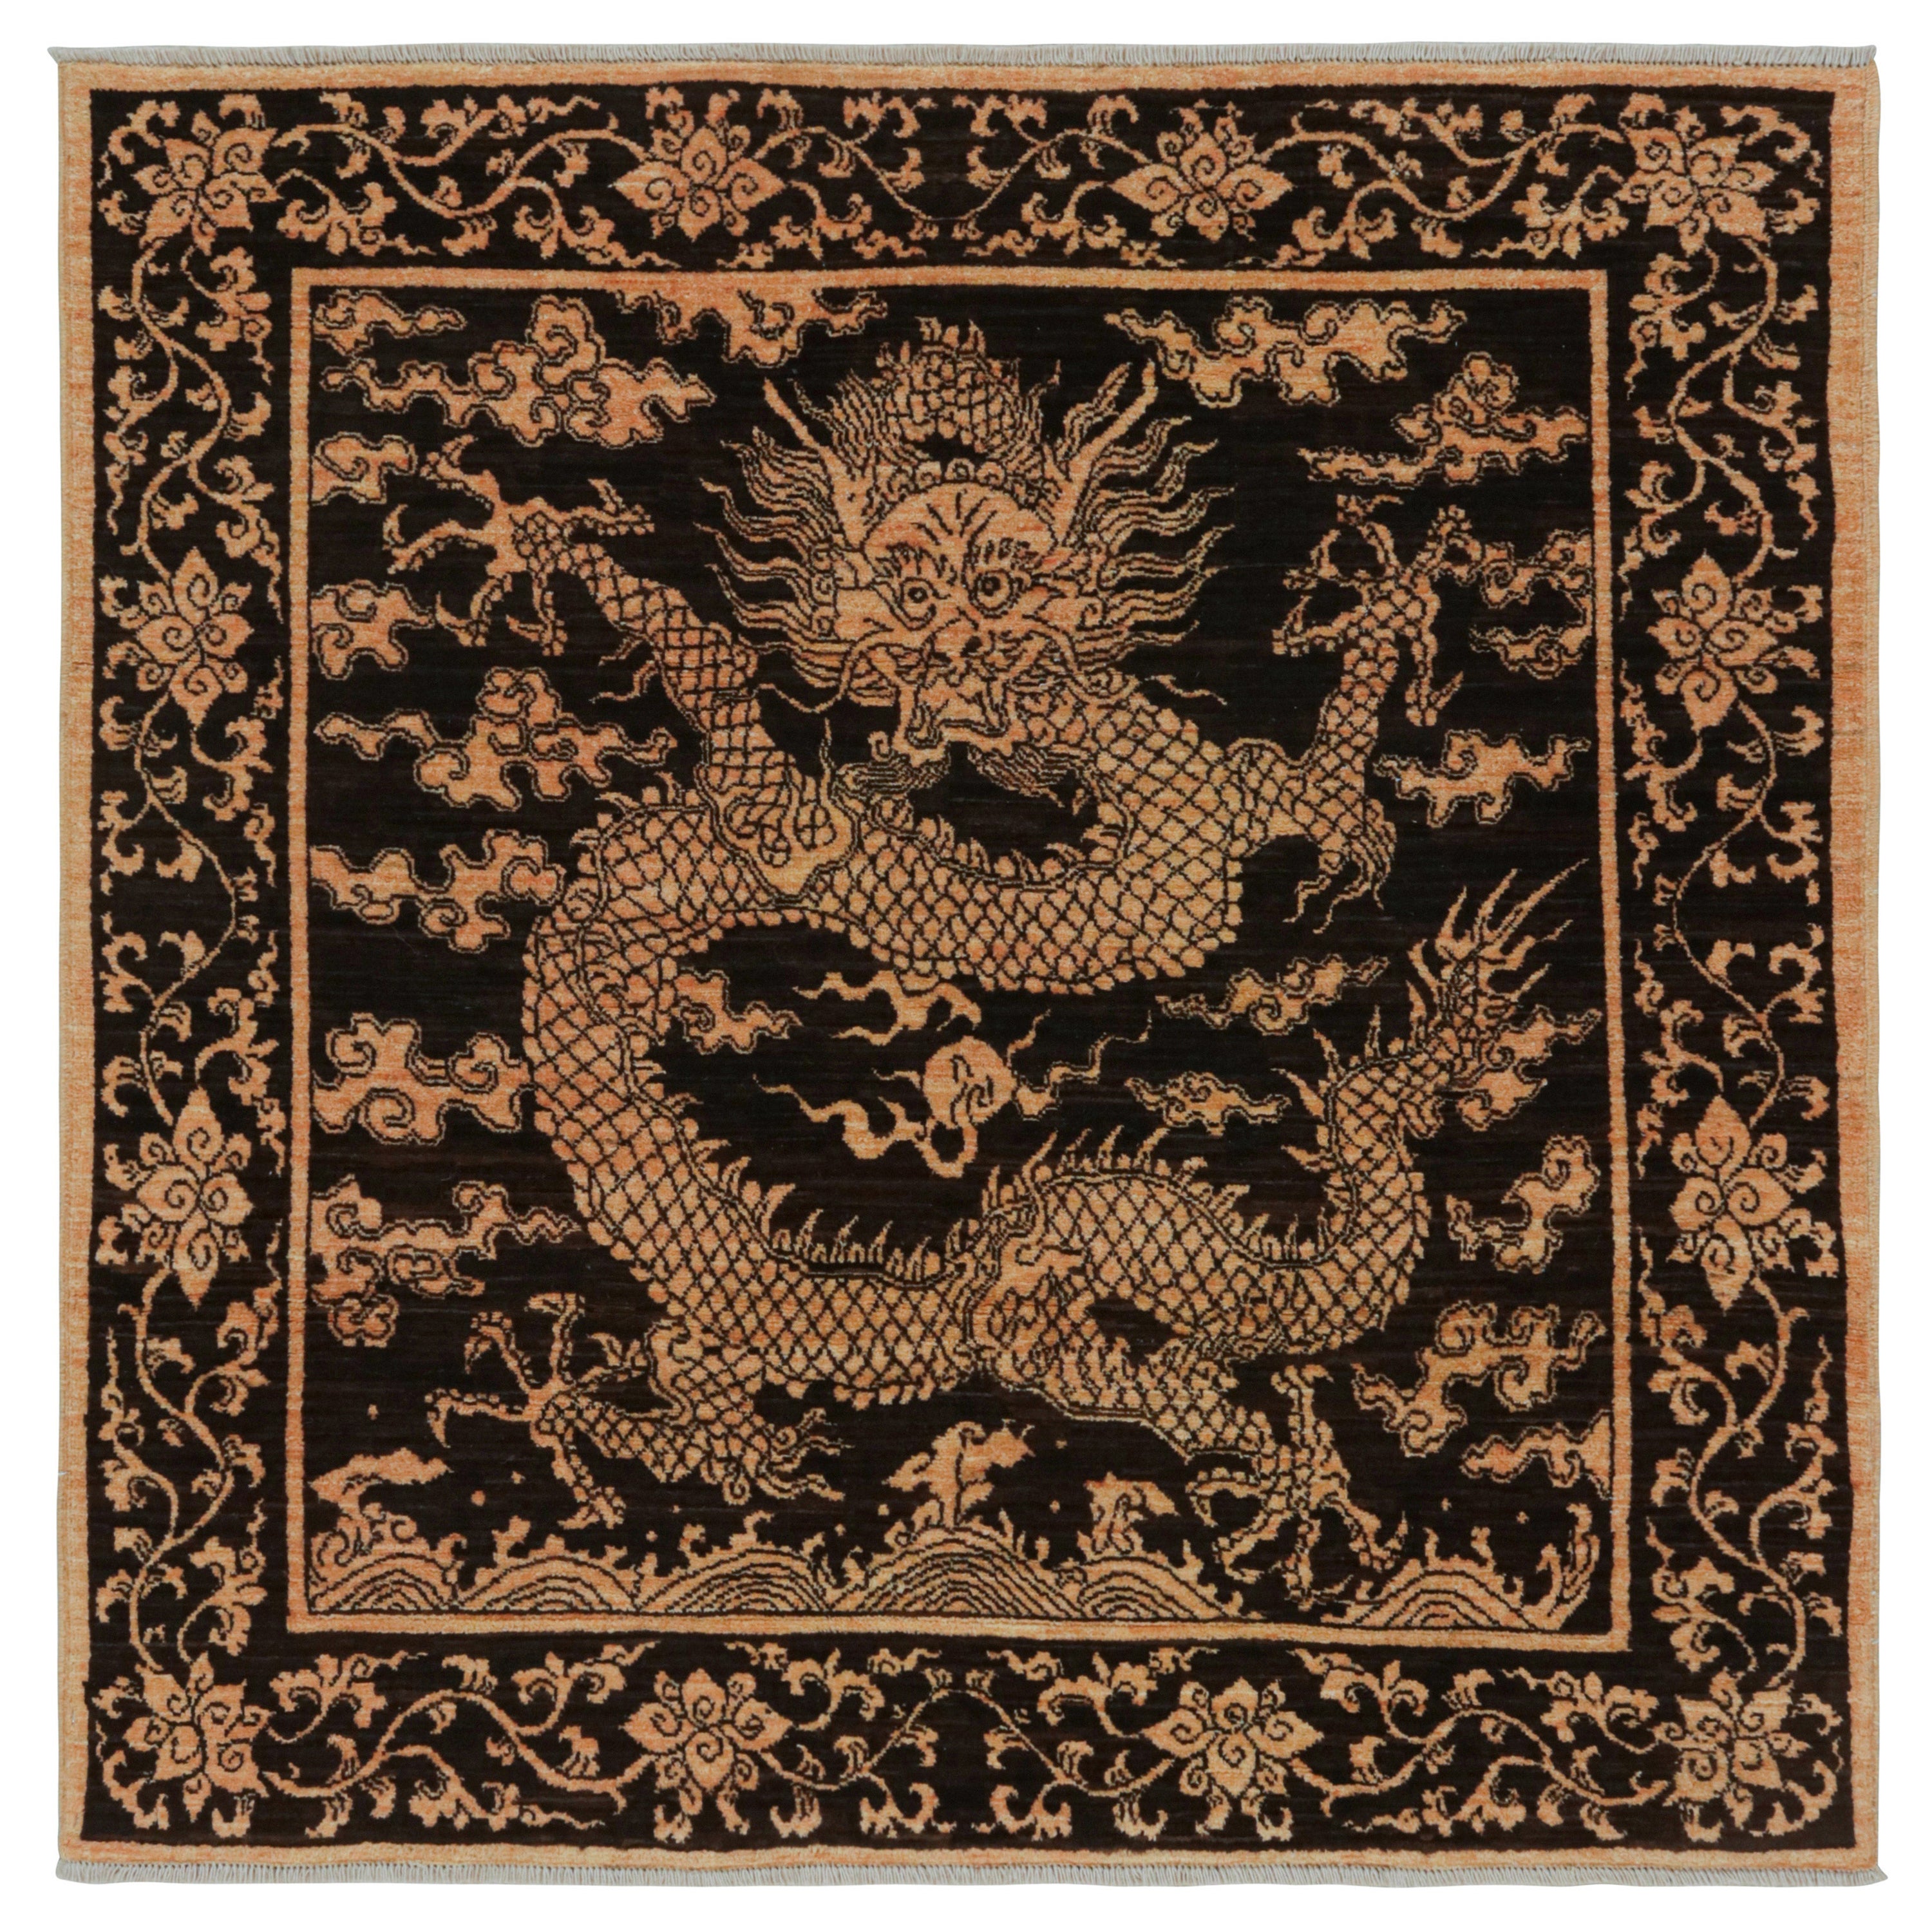 Rug & Kilim’s Chinese style Dragon Rug with Brown, Black and Gold Pictorials